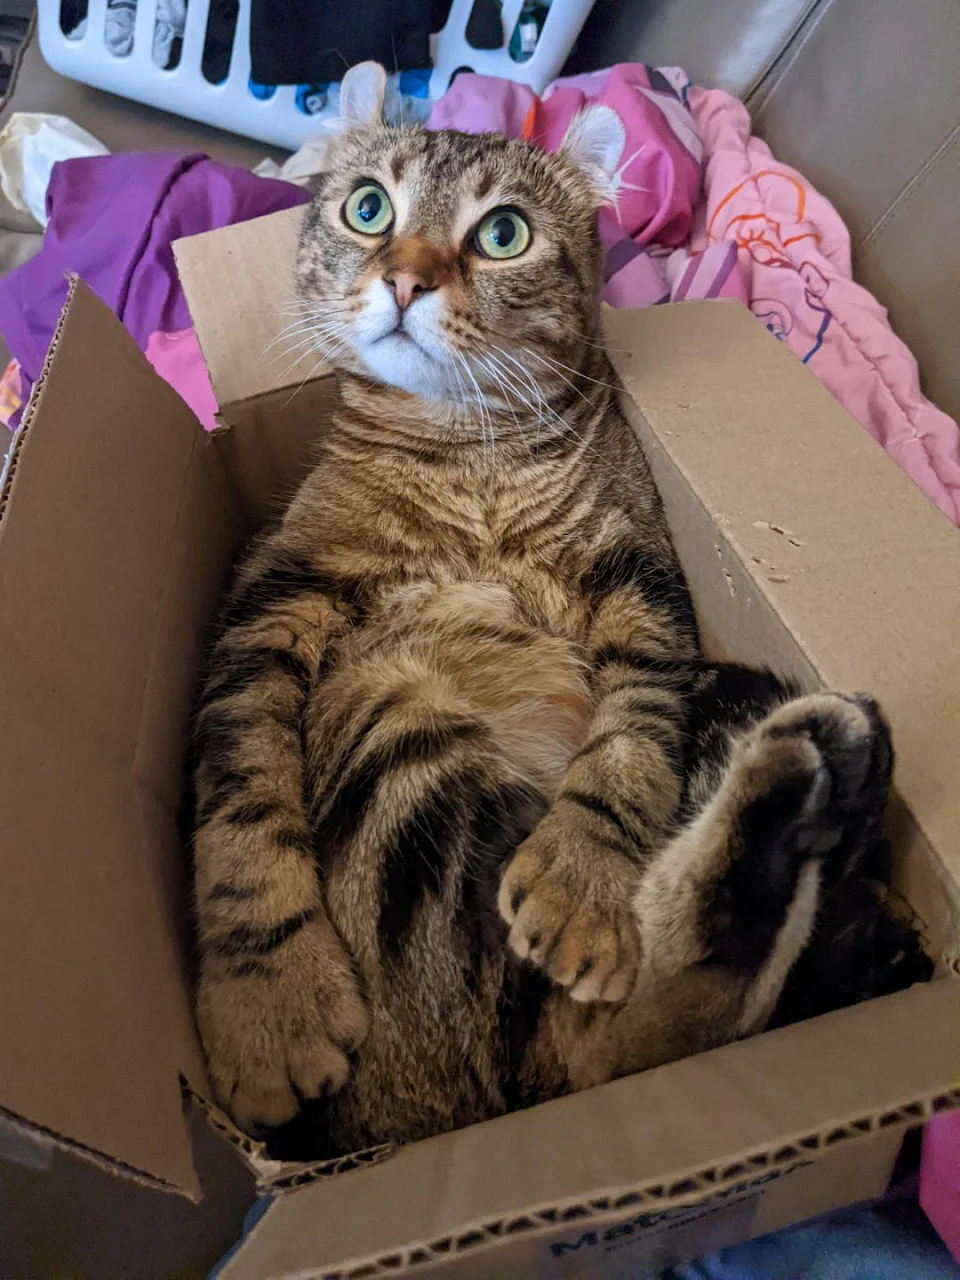 A gift real special, take a look inside. It's a derp in a box!